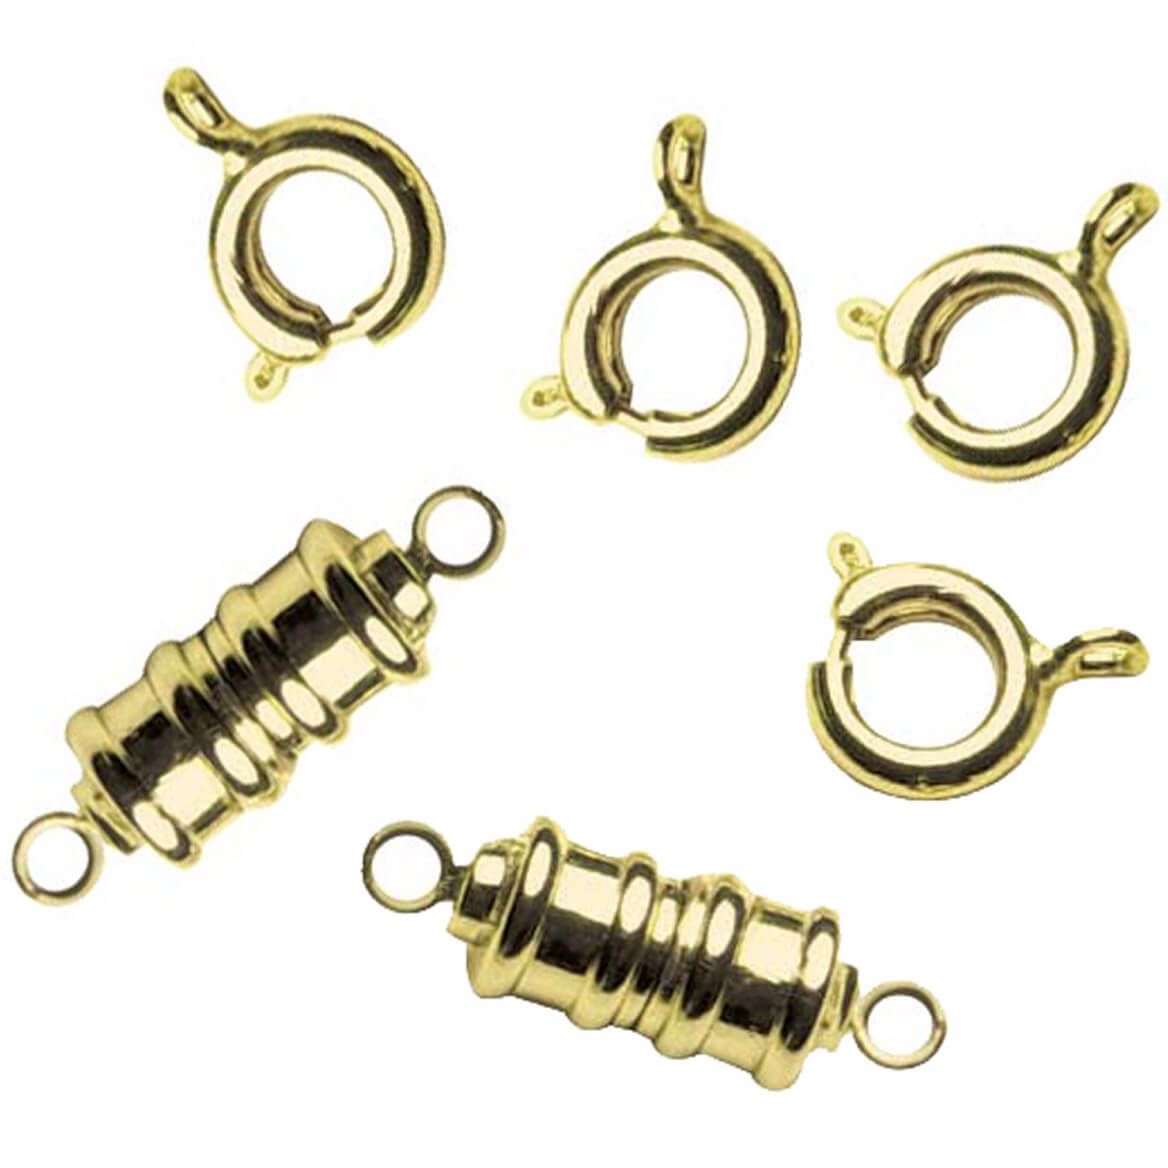 4pcs Magnetic Necklace Clasps And Closures Golden And Silver Plated  Bracelet Converter Clasp, Suitable For Necklaces Chain Extender Clasps  Jewelry Fi, Bracelet Clasps And Closures - valleyresorts.co.uk